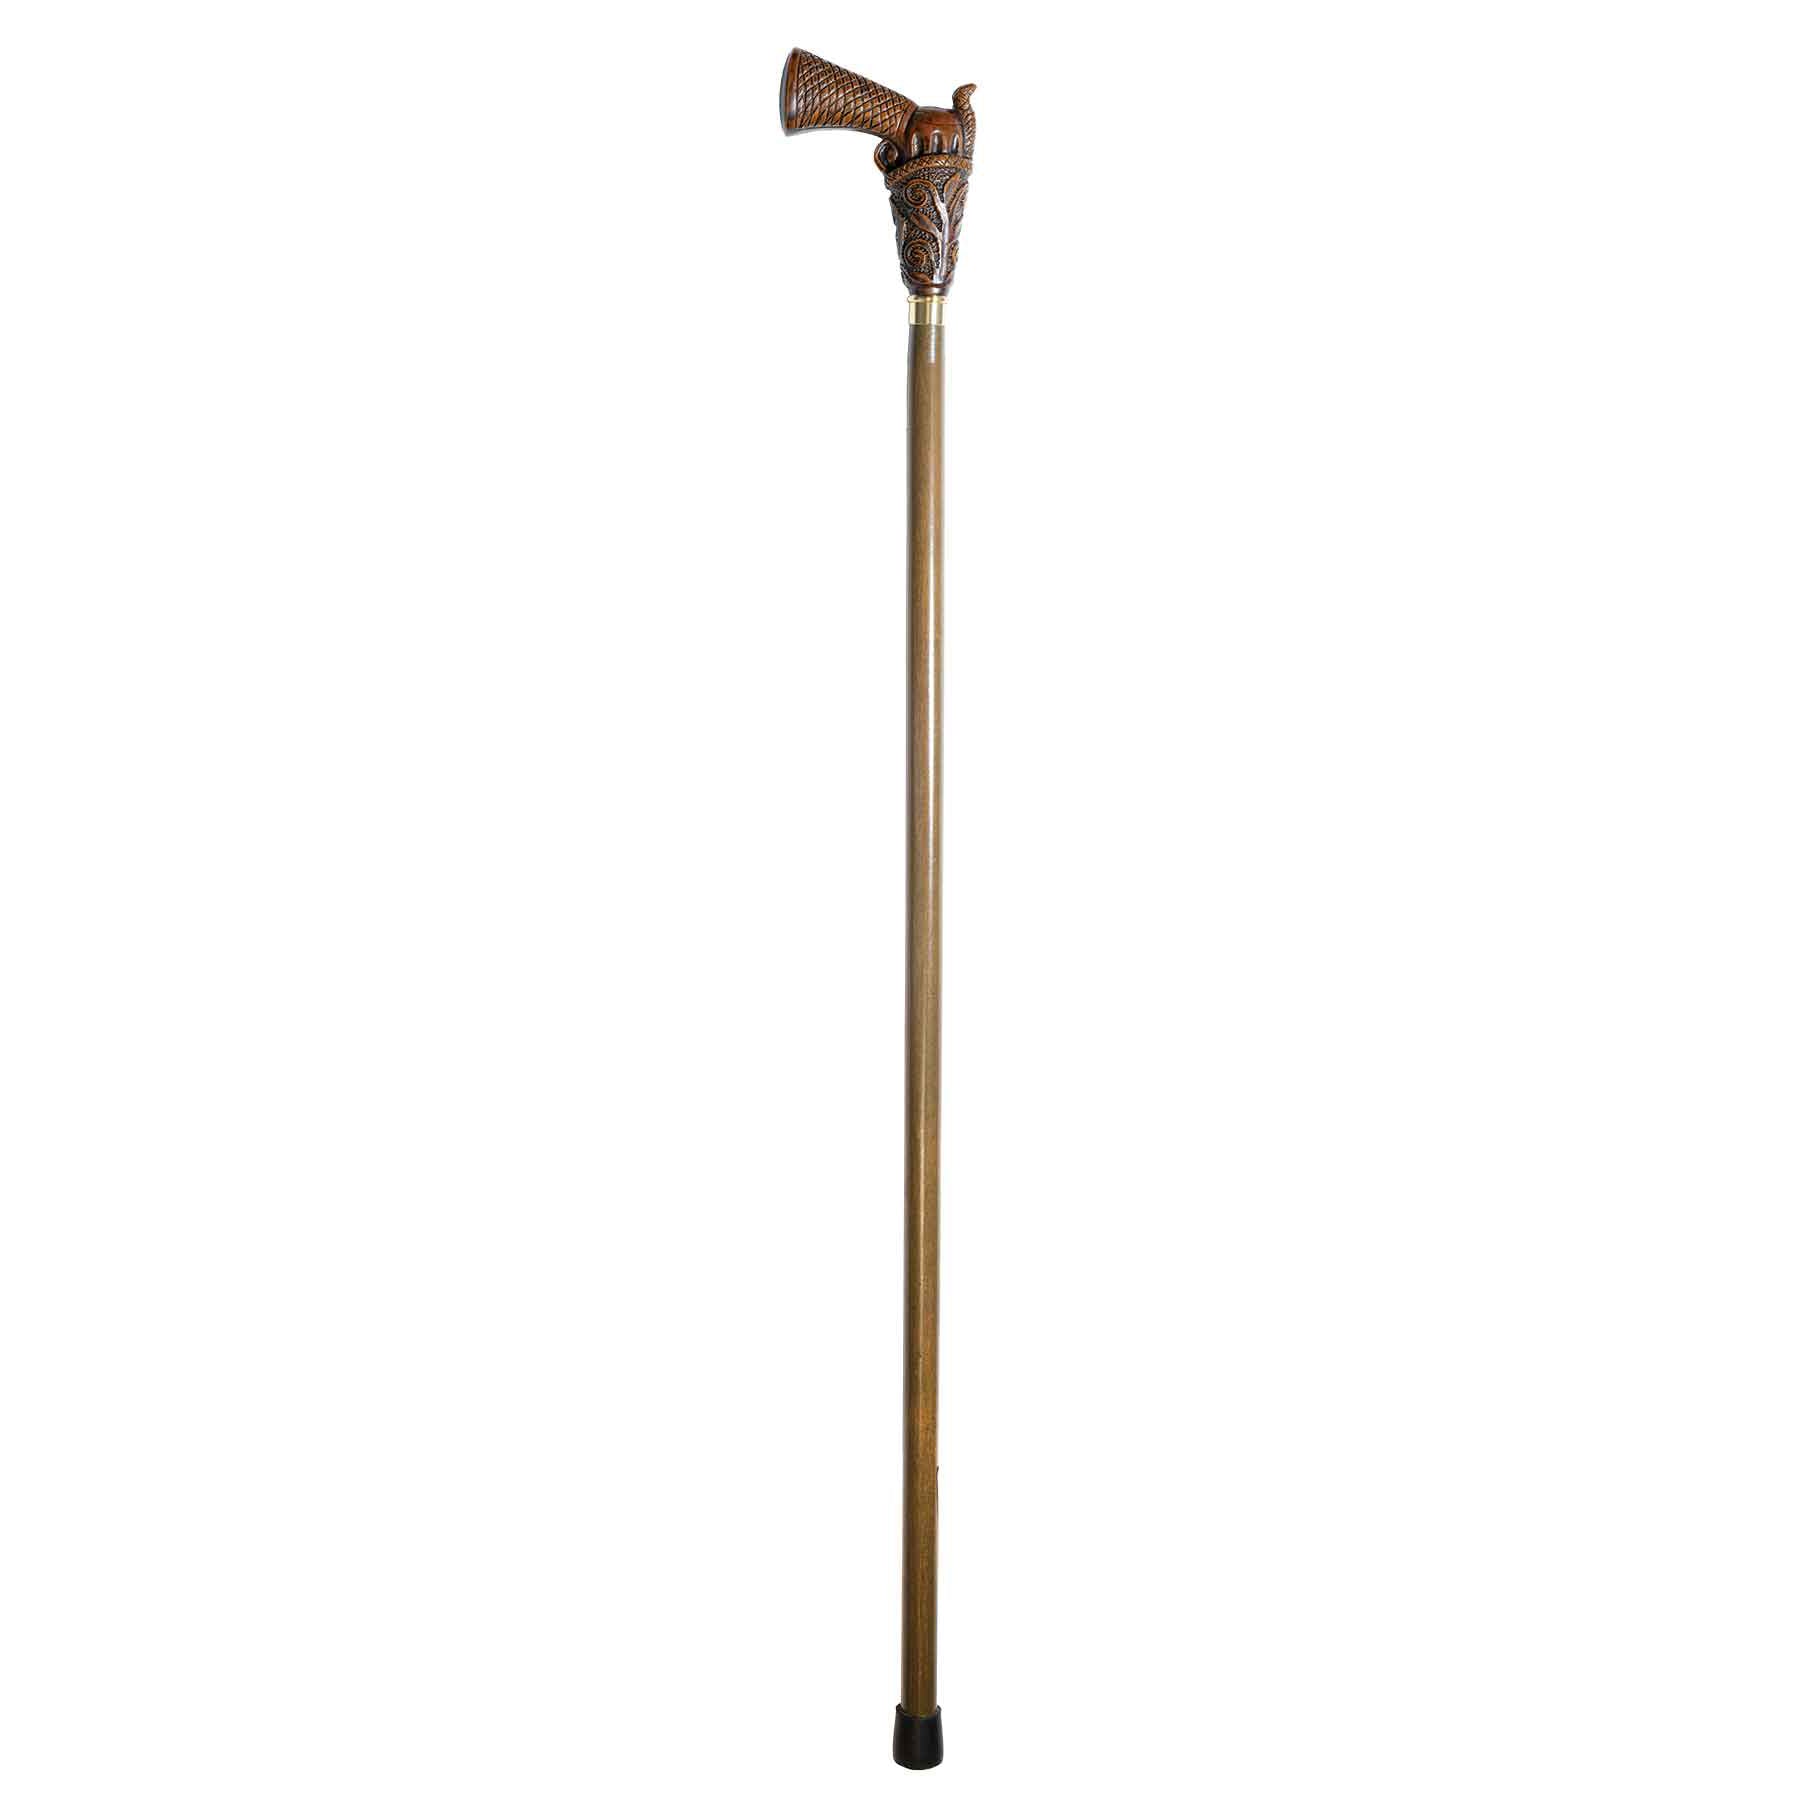 The Peacemaker Walking Cane